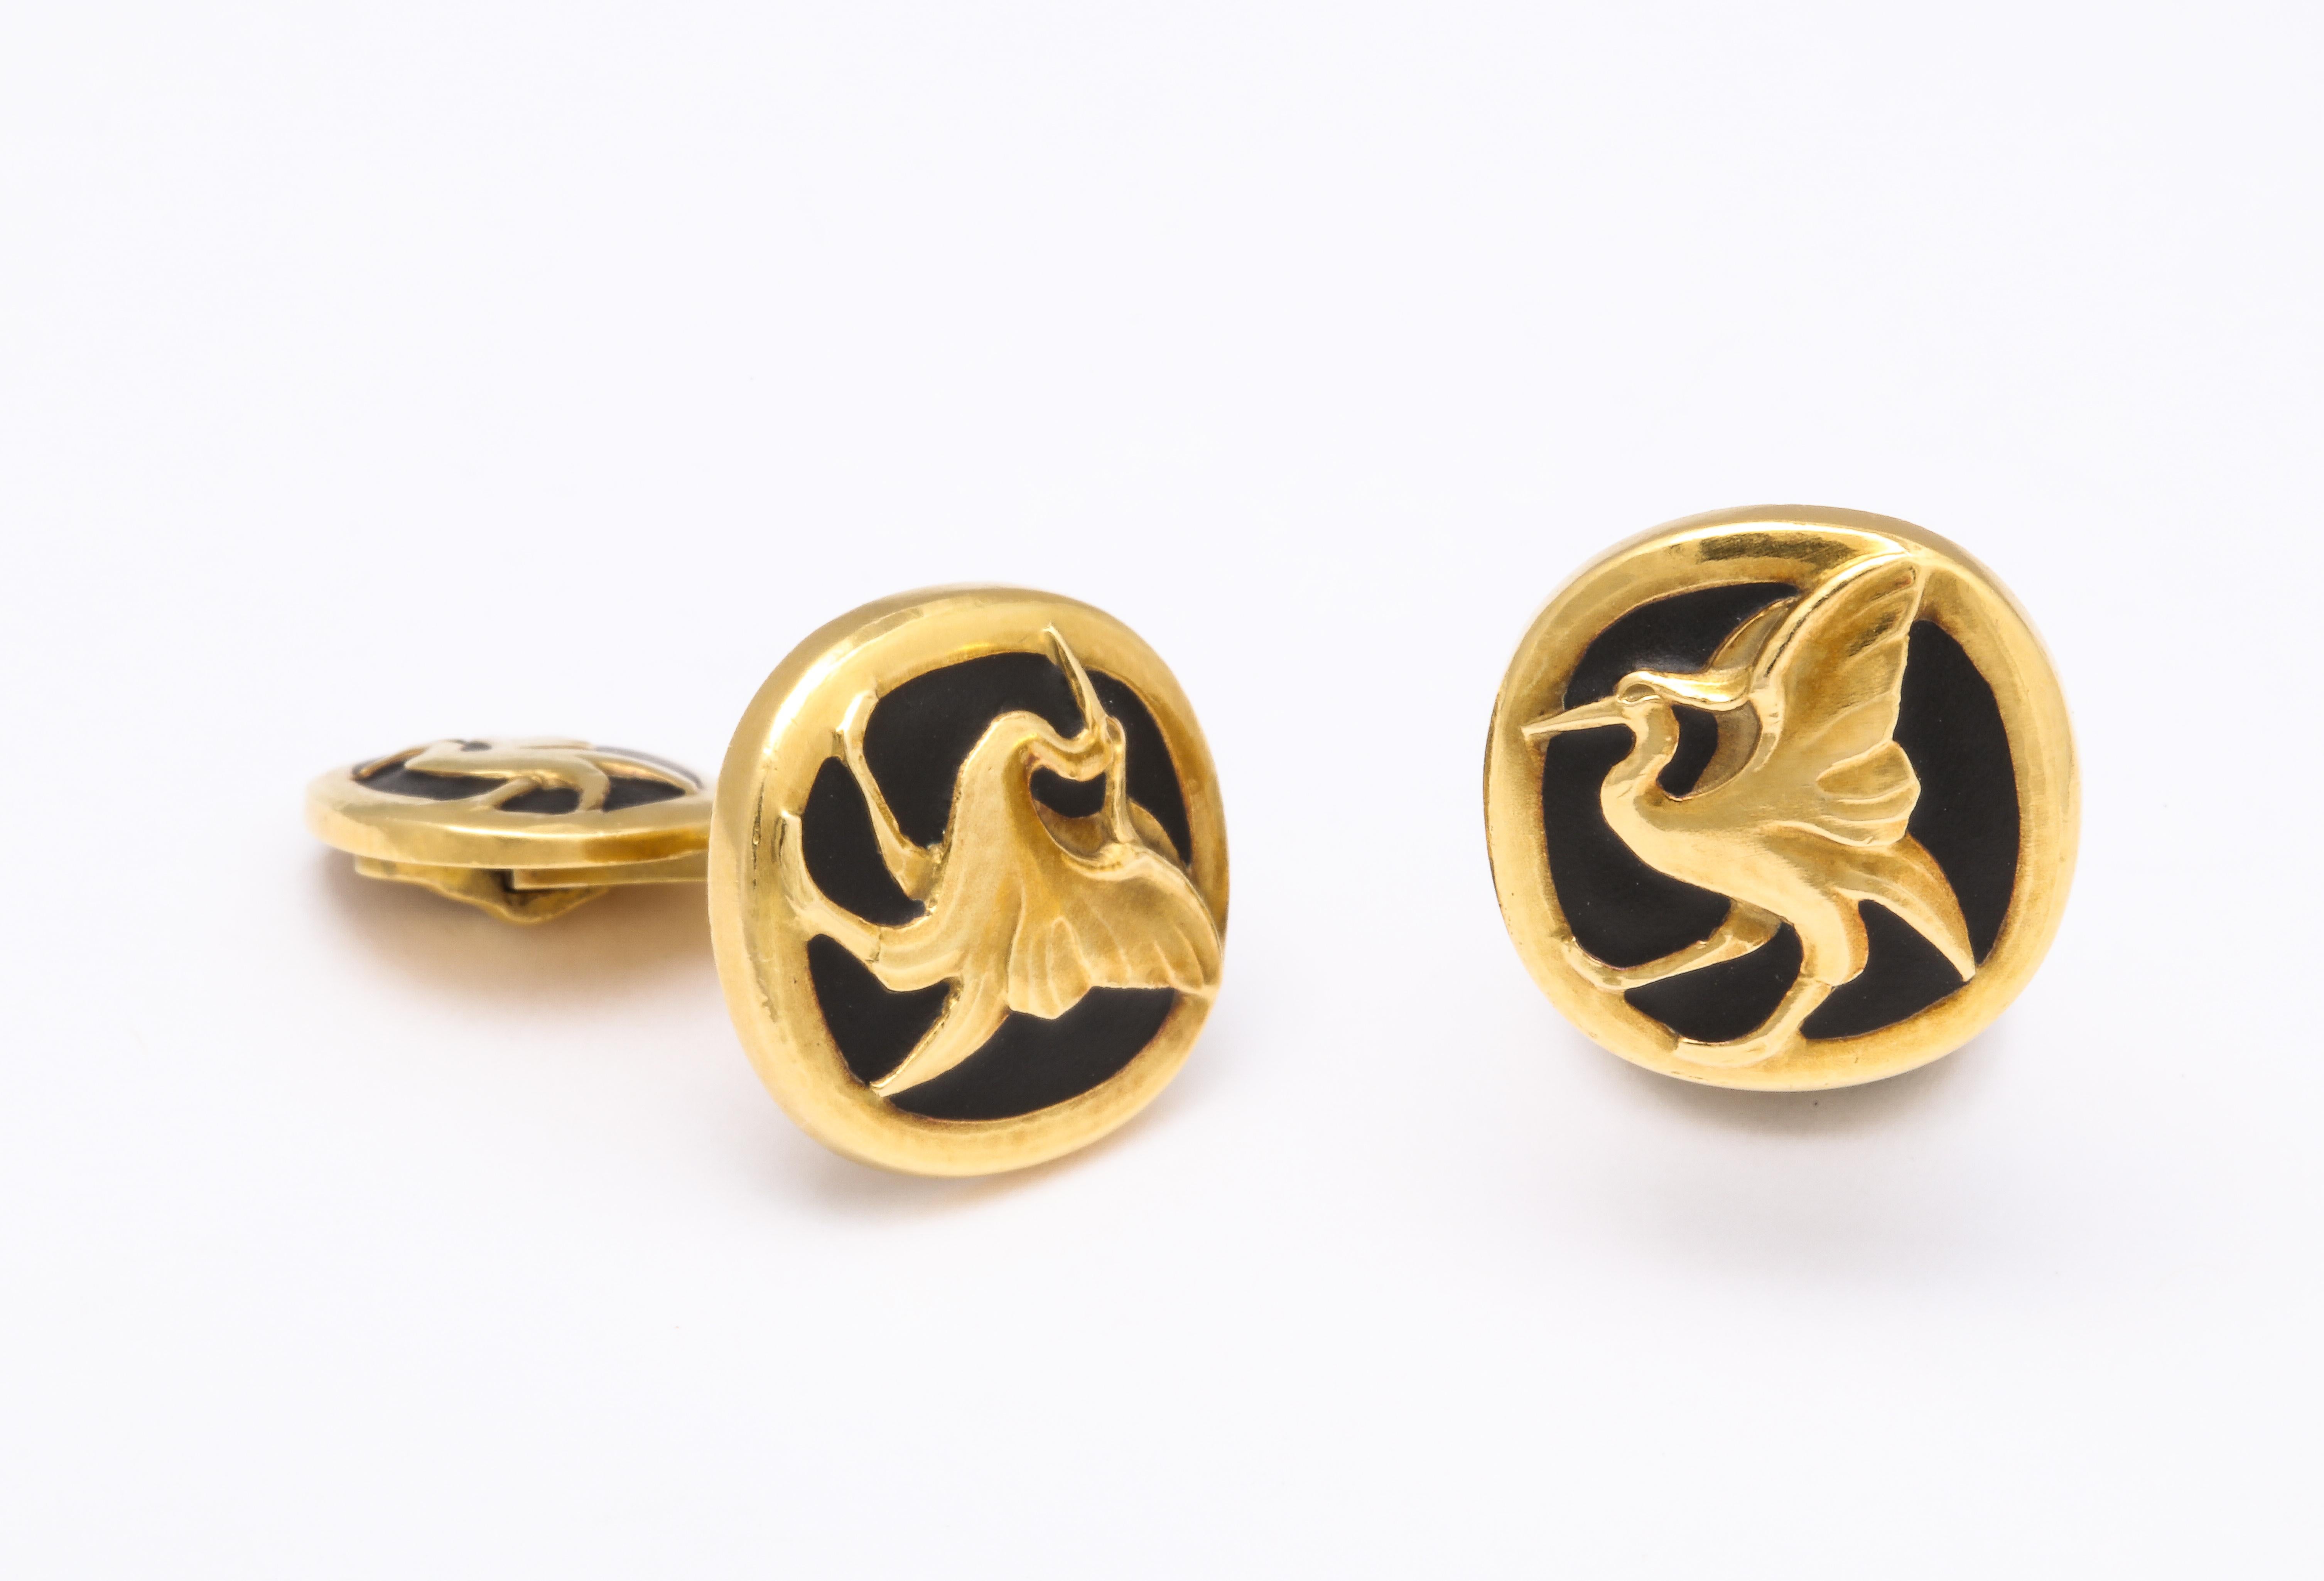 Georg Jensen cufflinks in black matte enamel and yellow gold, depicting a large flying bird. 29 grams, in excellent condition. Circa 1930. 

Materials:
Yellow Gold
Black Matte Enamel

Measurements:
29 grams
